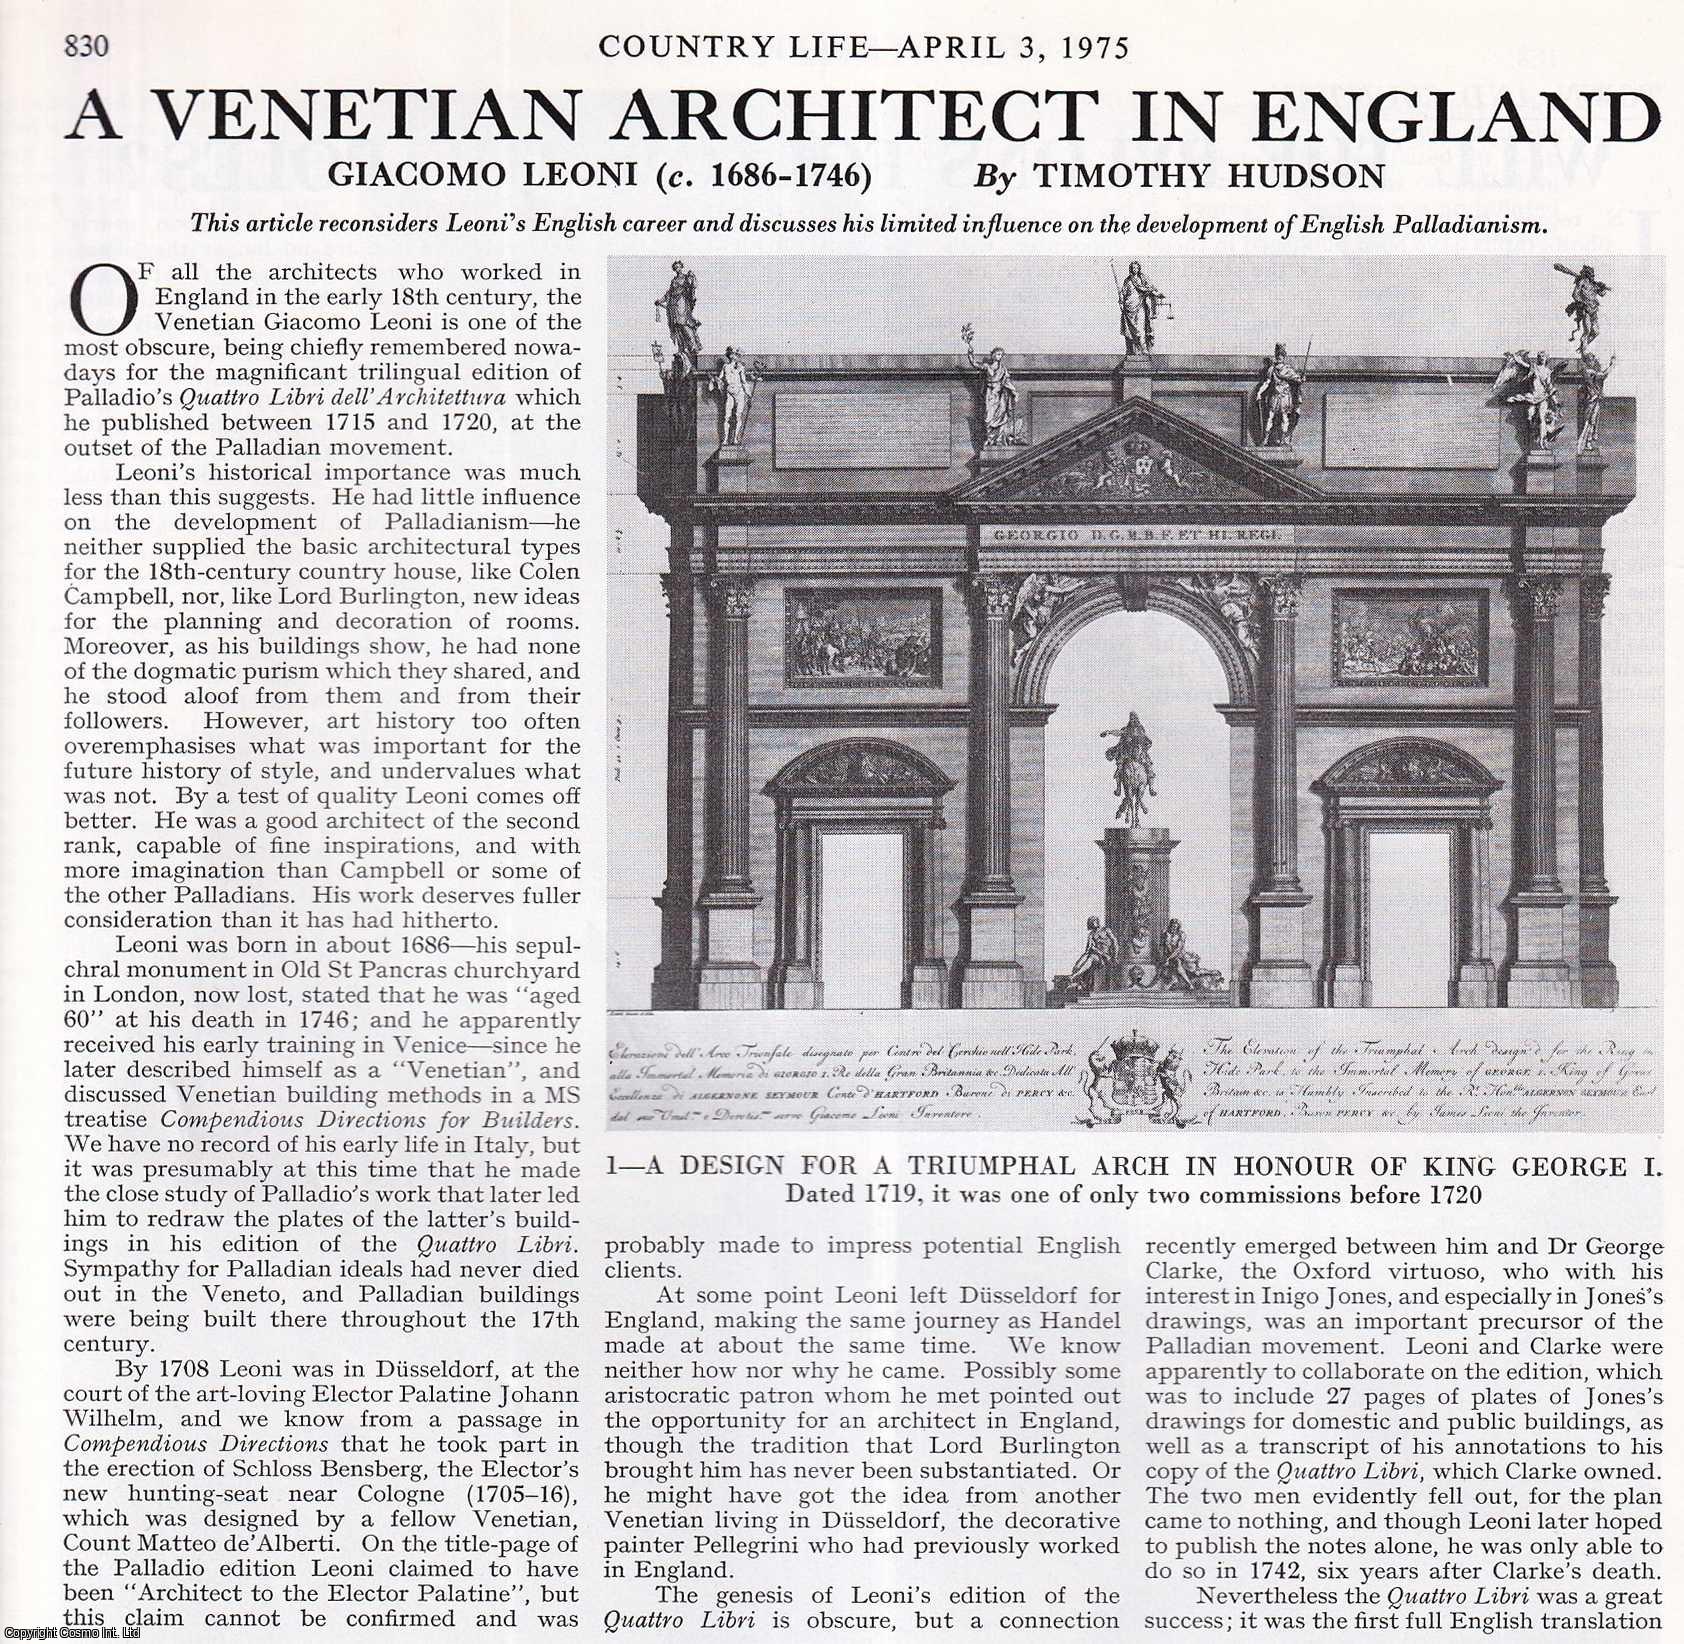 Timothy Hudson - Giacomo Leoni (c. 1686-1746): A Venetian Architect in England. Several pictures and accompanying text, removed from an original issue of Country Life Magazine, 1975.